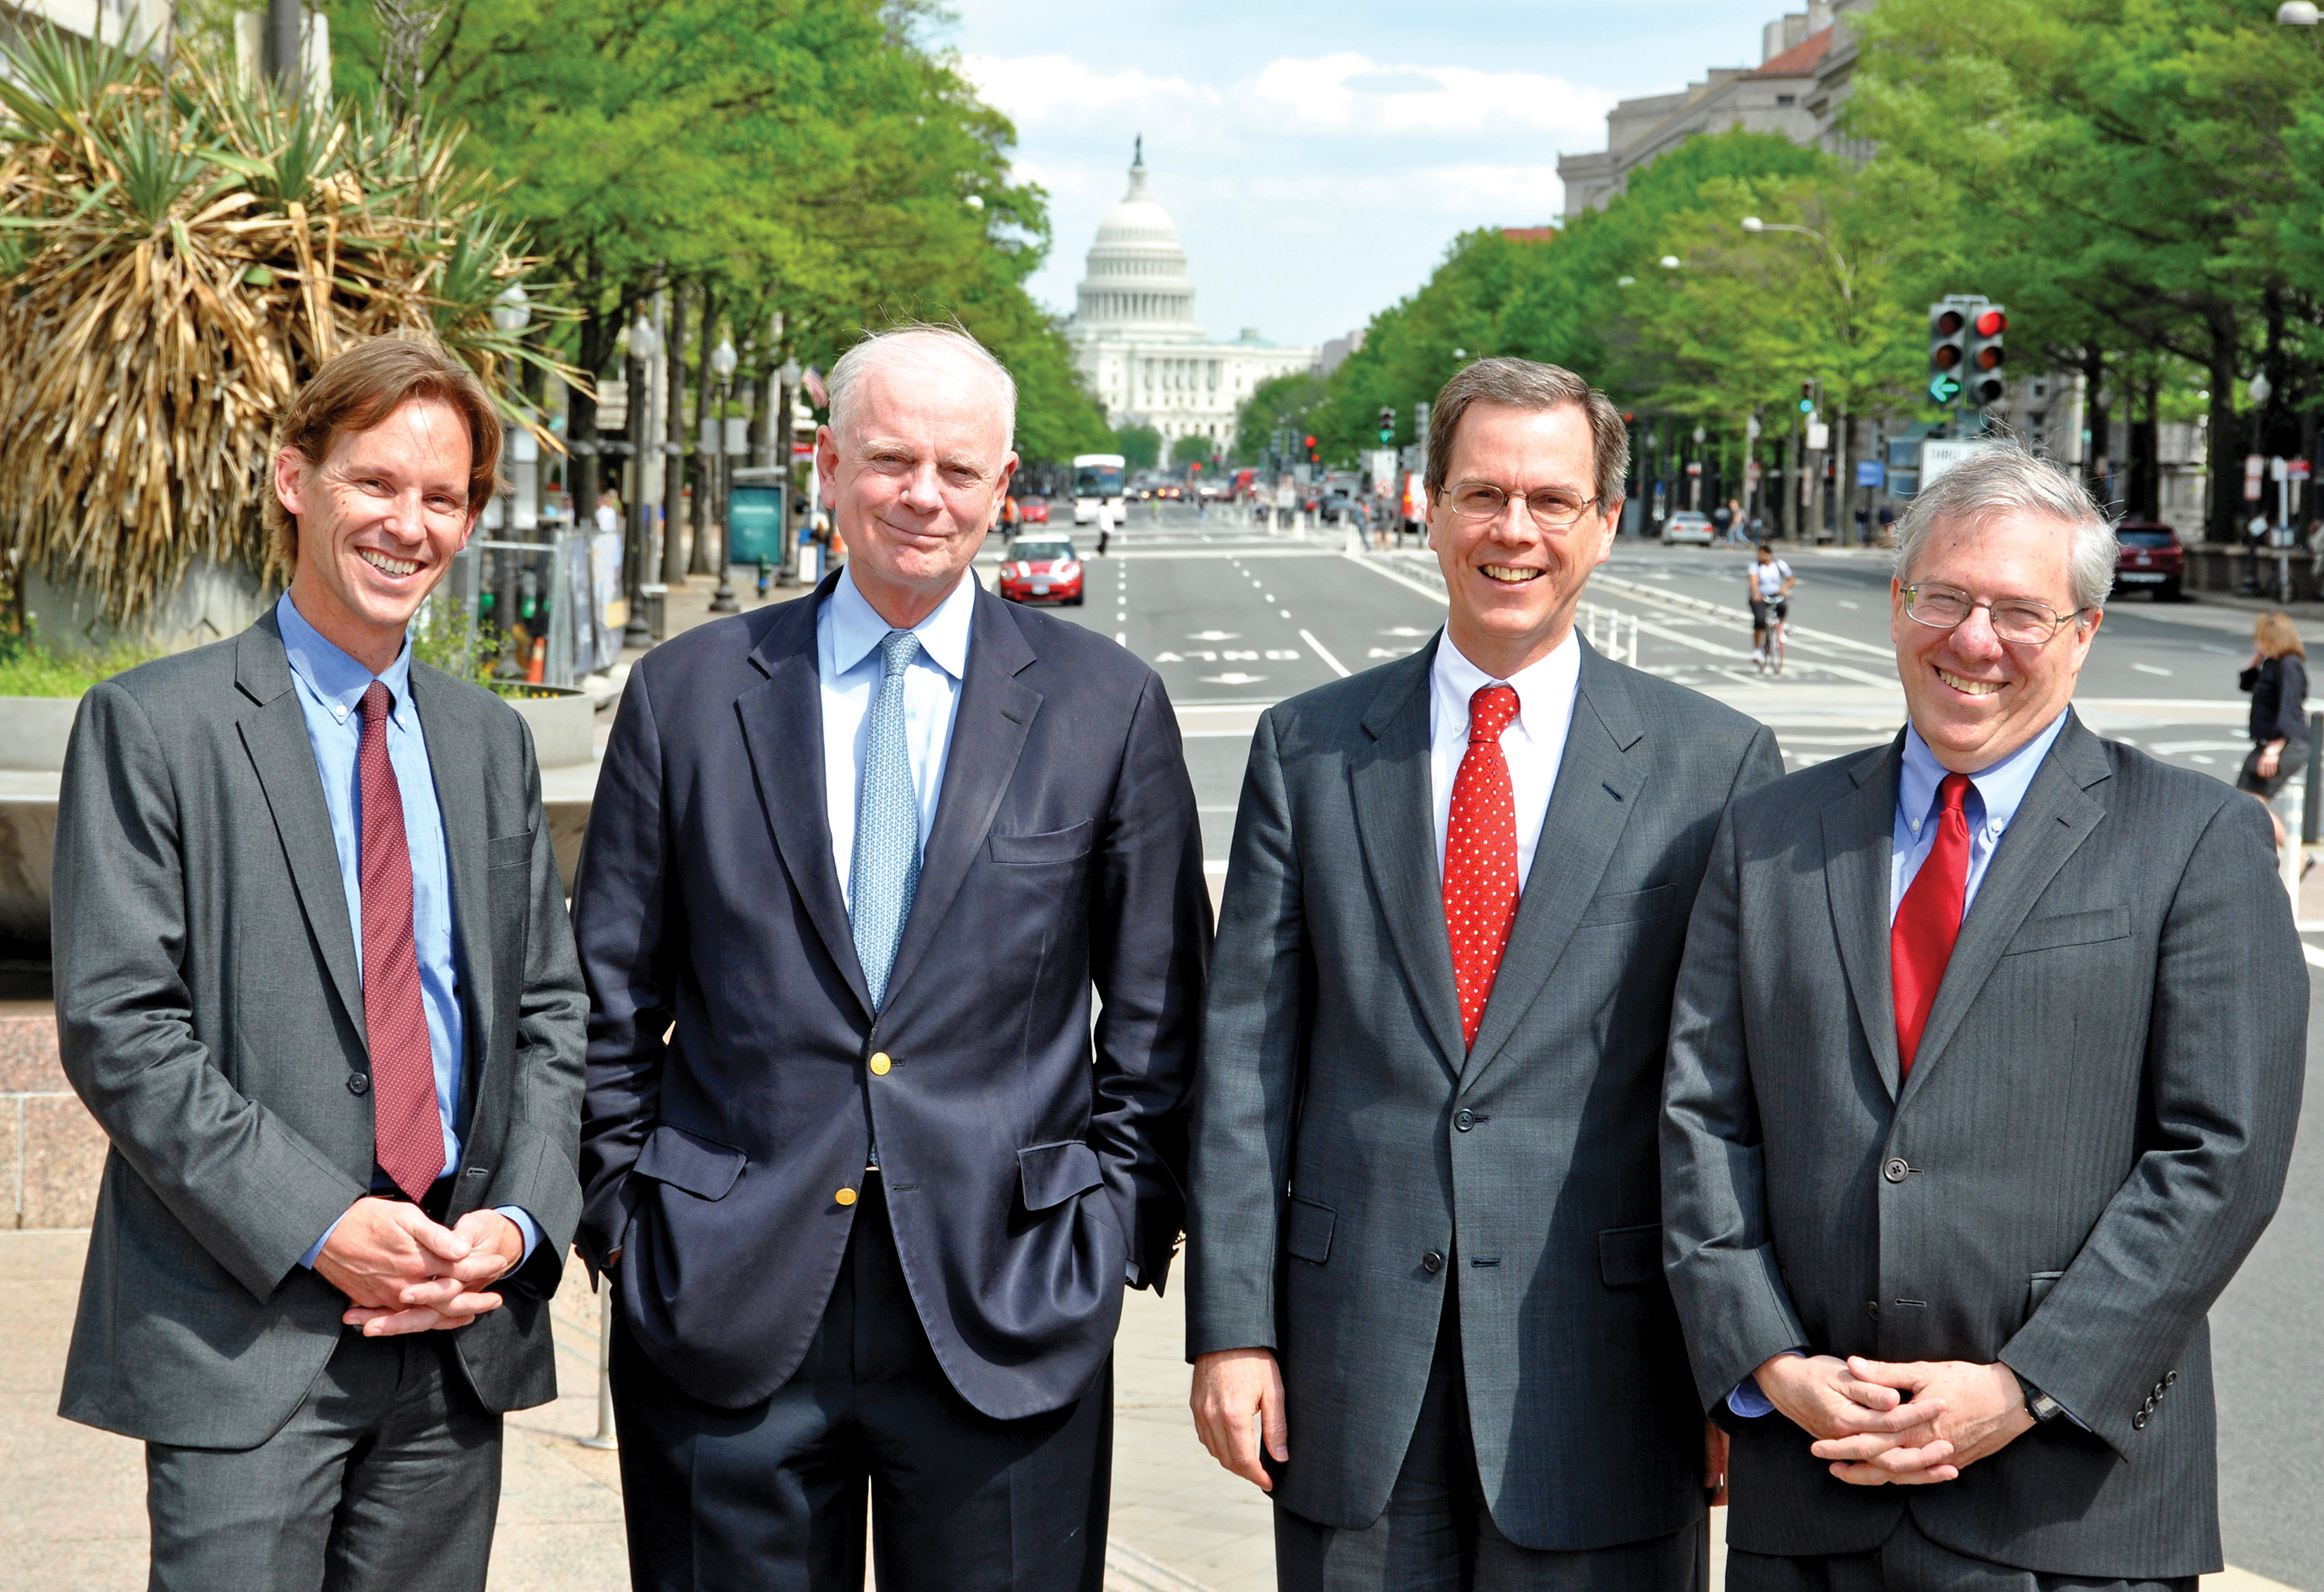 Four Wesleyan graduates collaborate on USAID’s  crucial water projects, just down the avenue from the White House: John Pasch ’93, Christian Holmes ’68, Charles North ’82, and Eric Postel ’77.